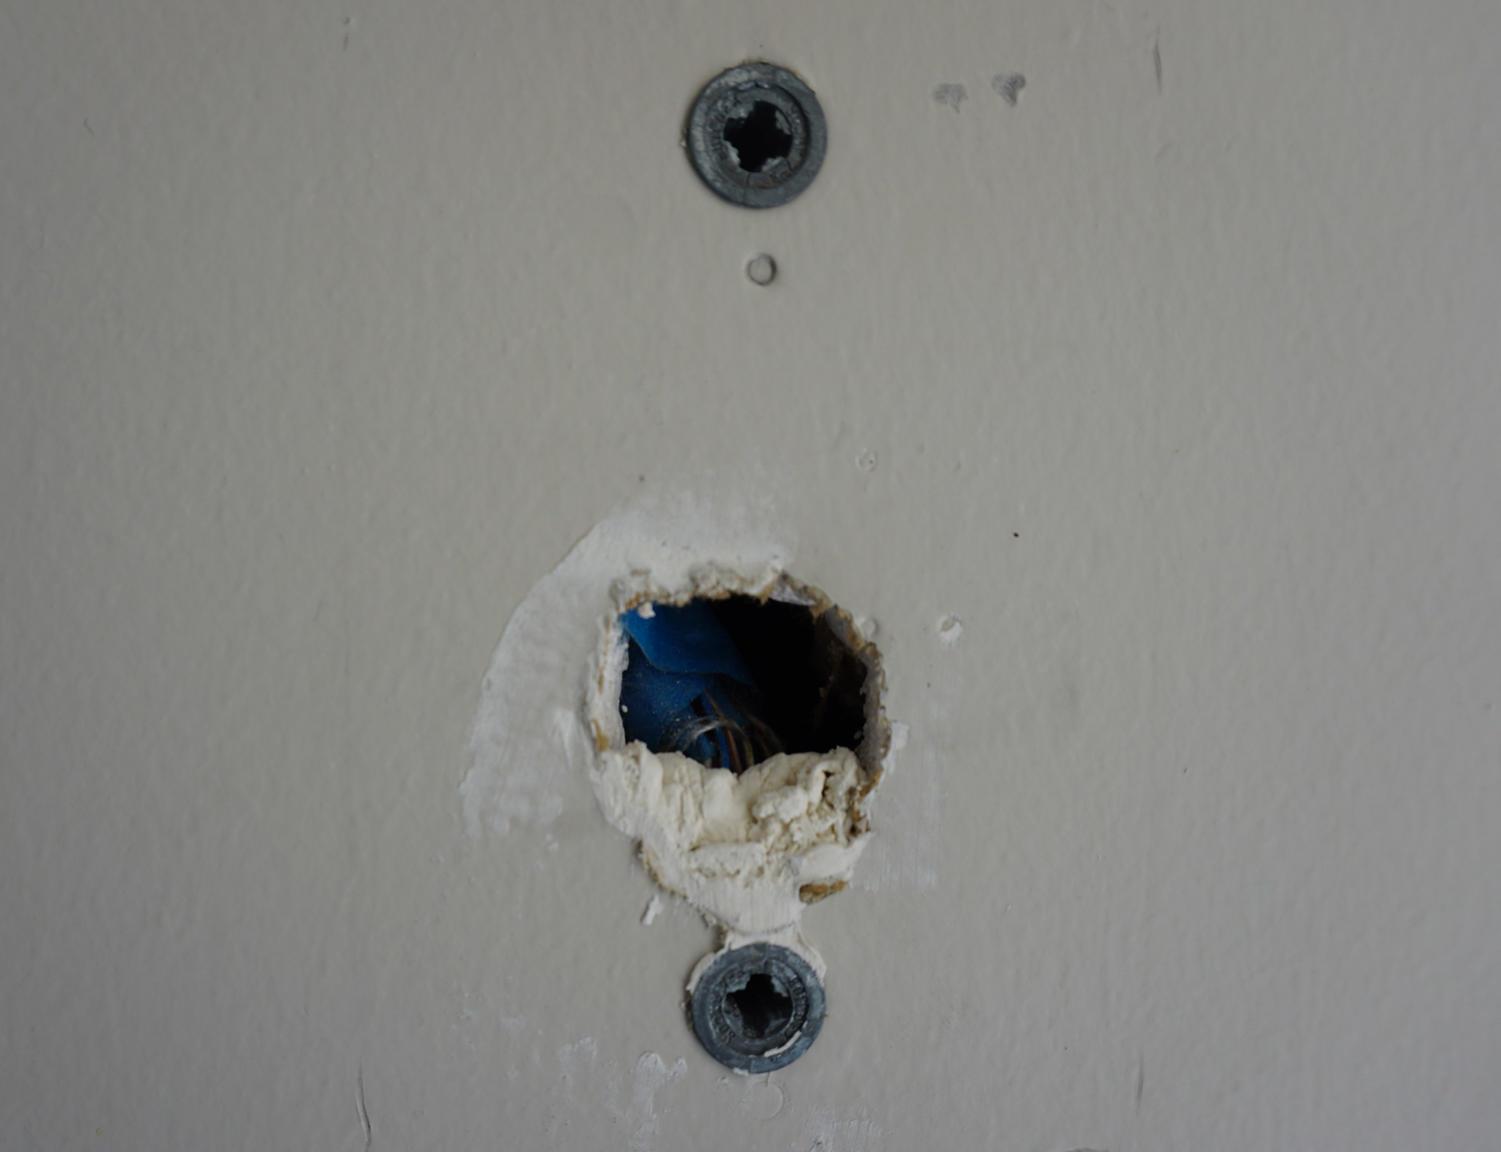 A wall in the Fine-Arts-2 building contains an unpatched hole, exposing an electrical wire 12/6.